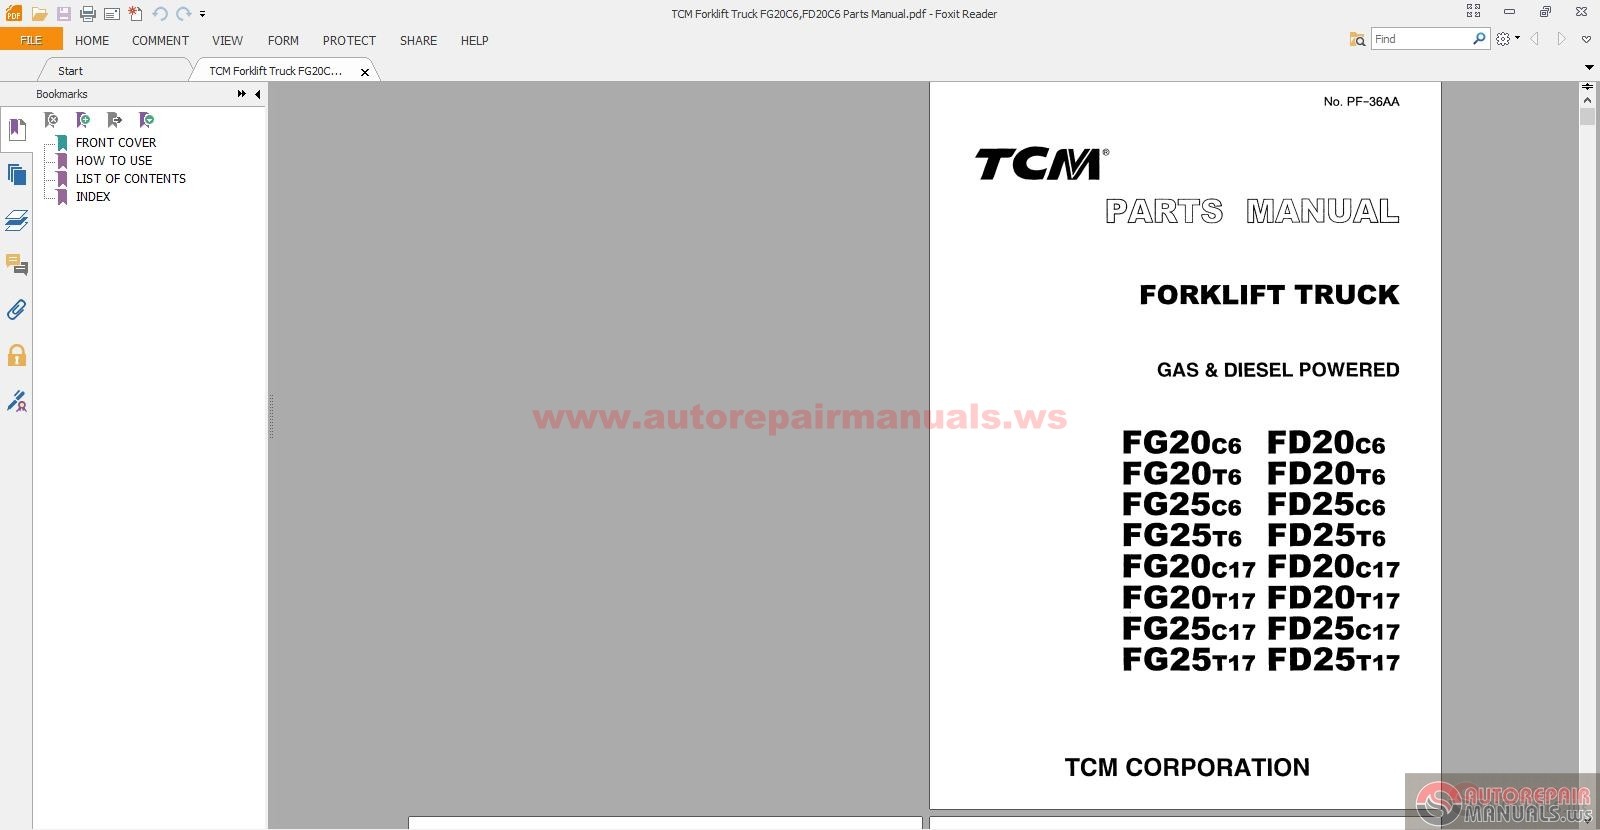 Tcm Forklift Wiring Diagram from img.autorepairmanuals.ws